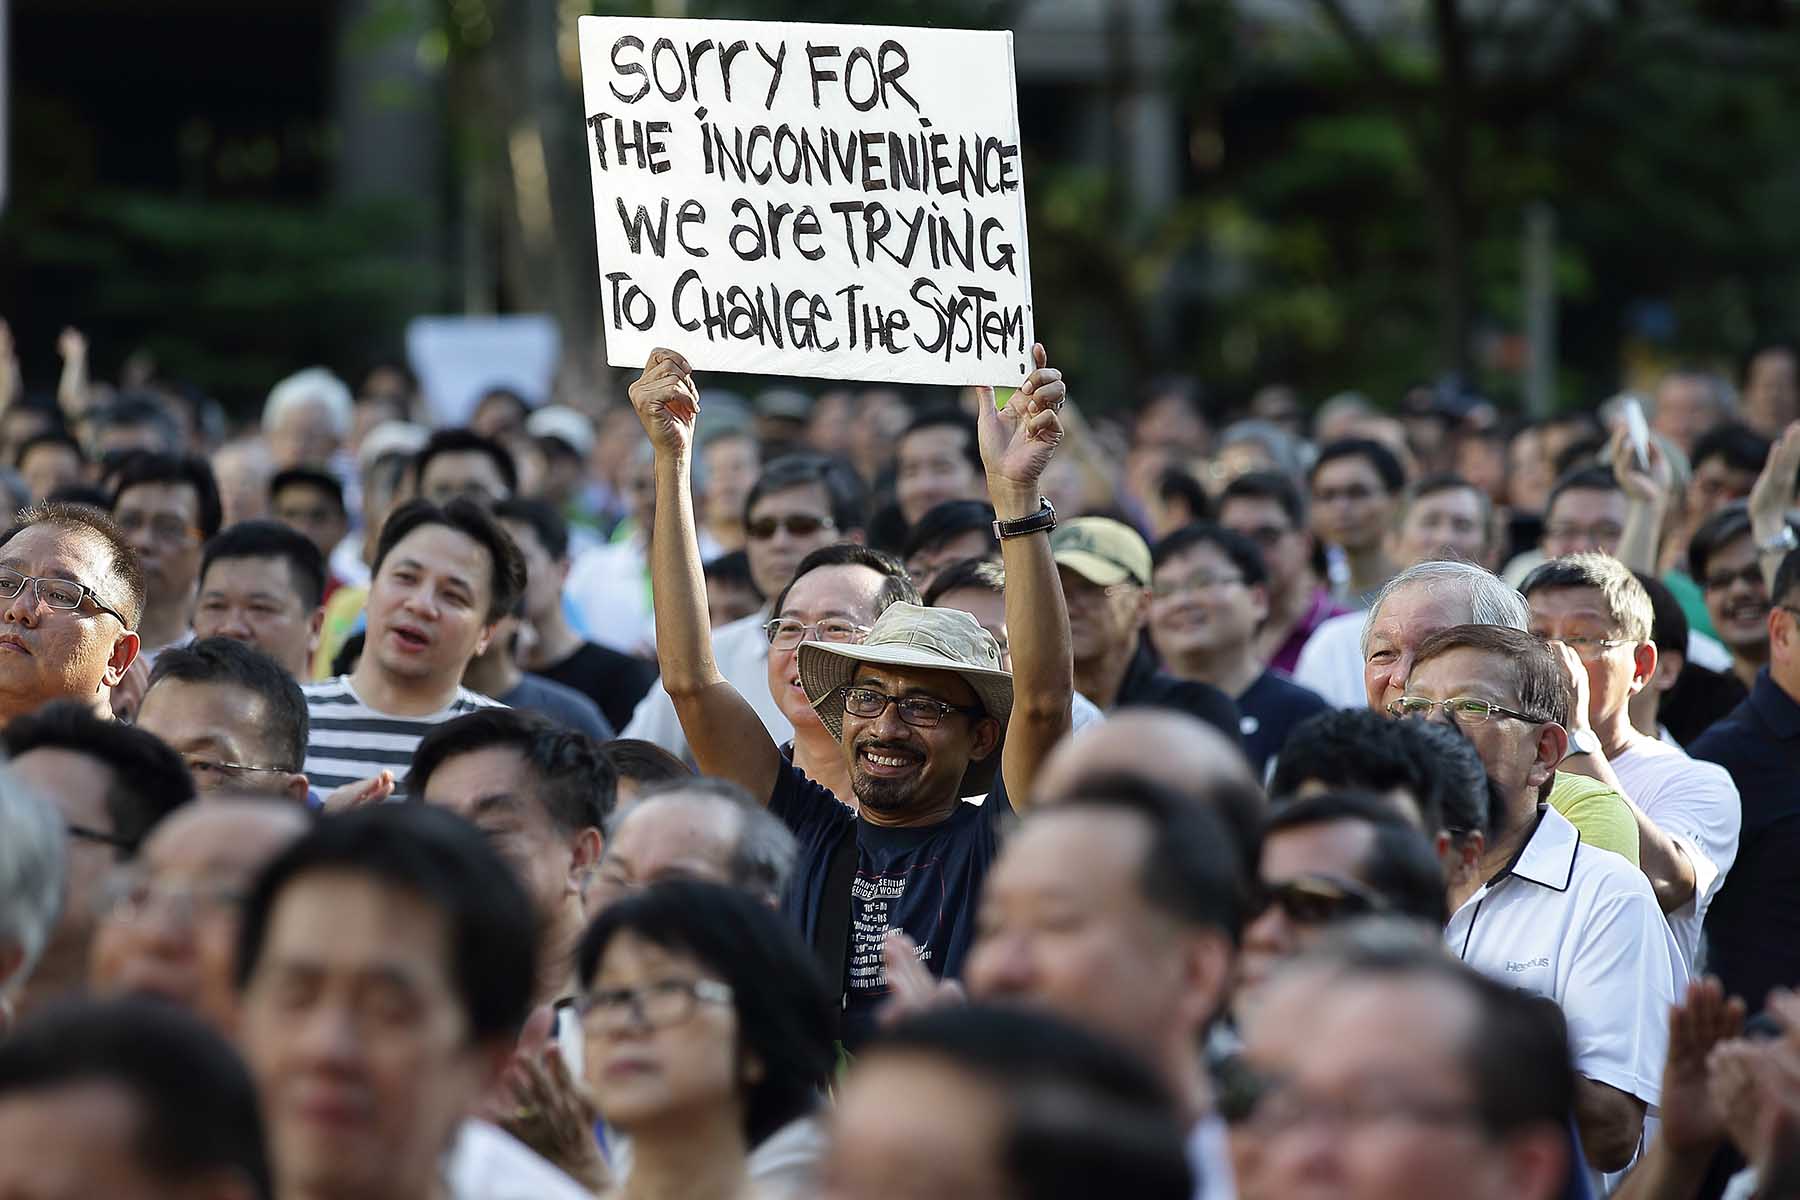 A smiling man holds up a sign saying "sorry for the inconvenience, we're trying to change the system" during a 2014 protest at the Speakers' Corner at Hong Lim Park in Singapore. He is surrounded by a large crowd.